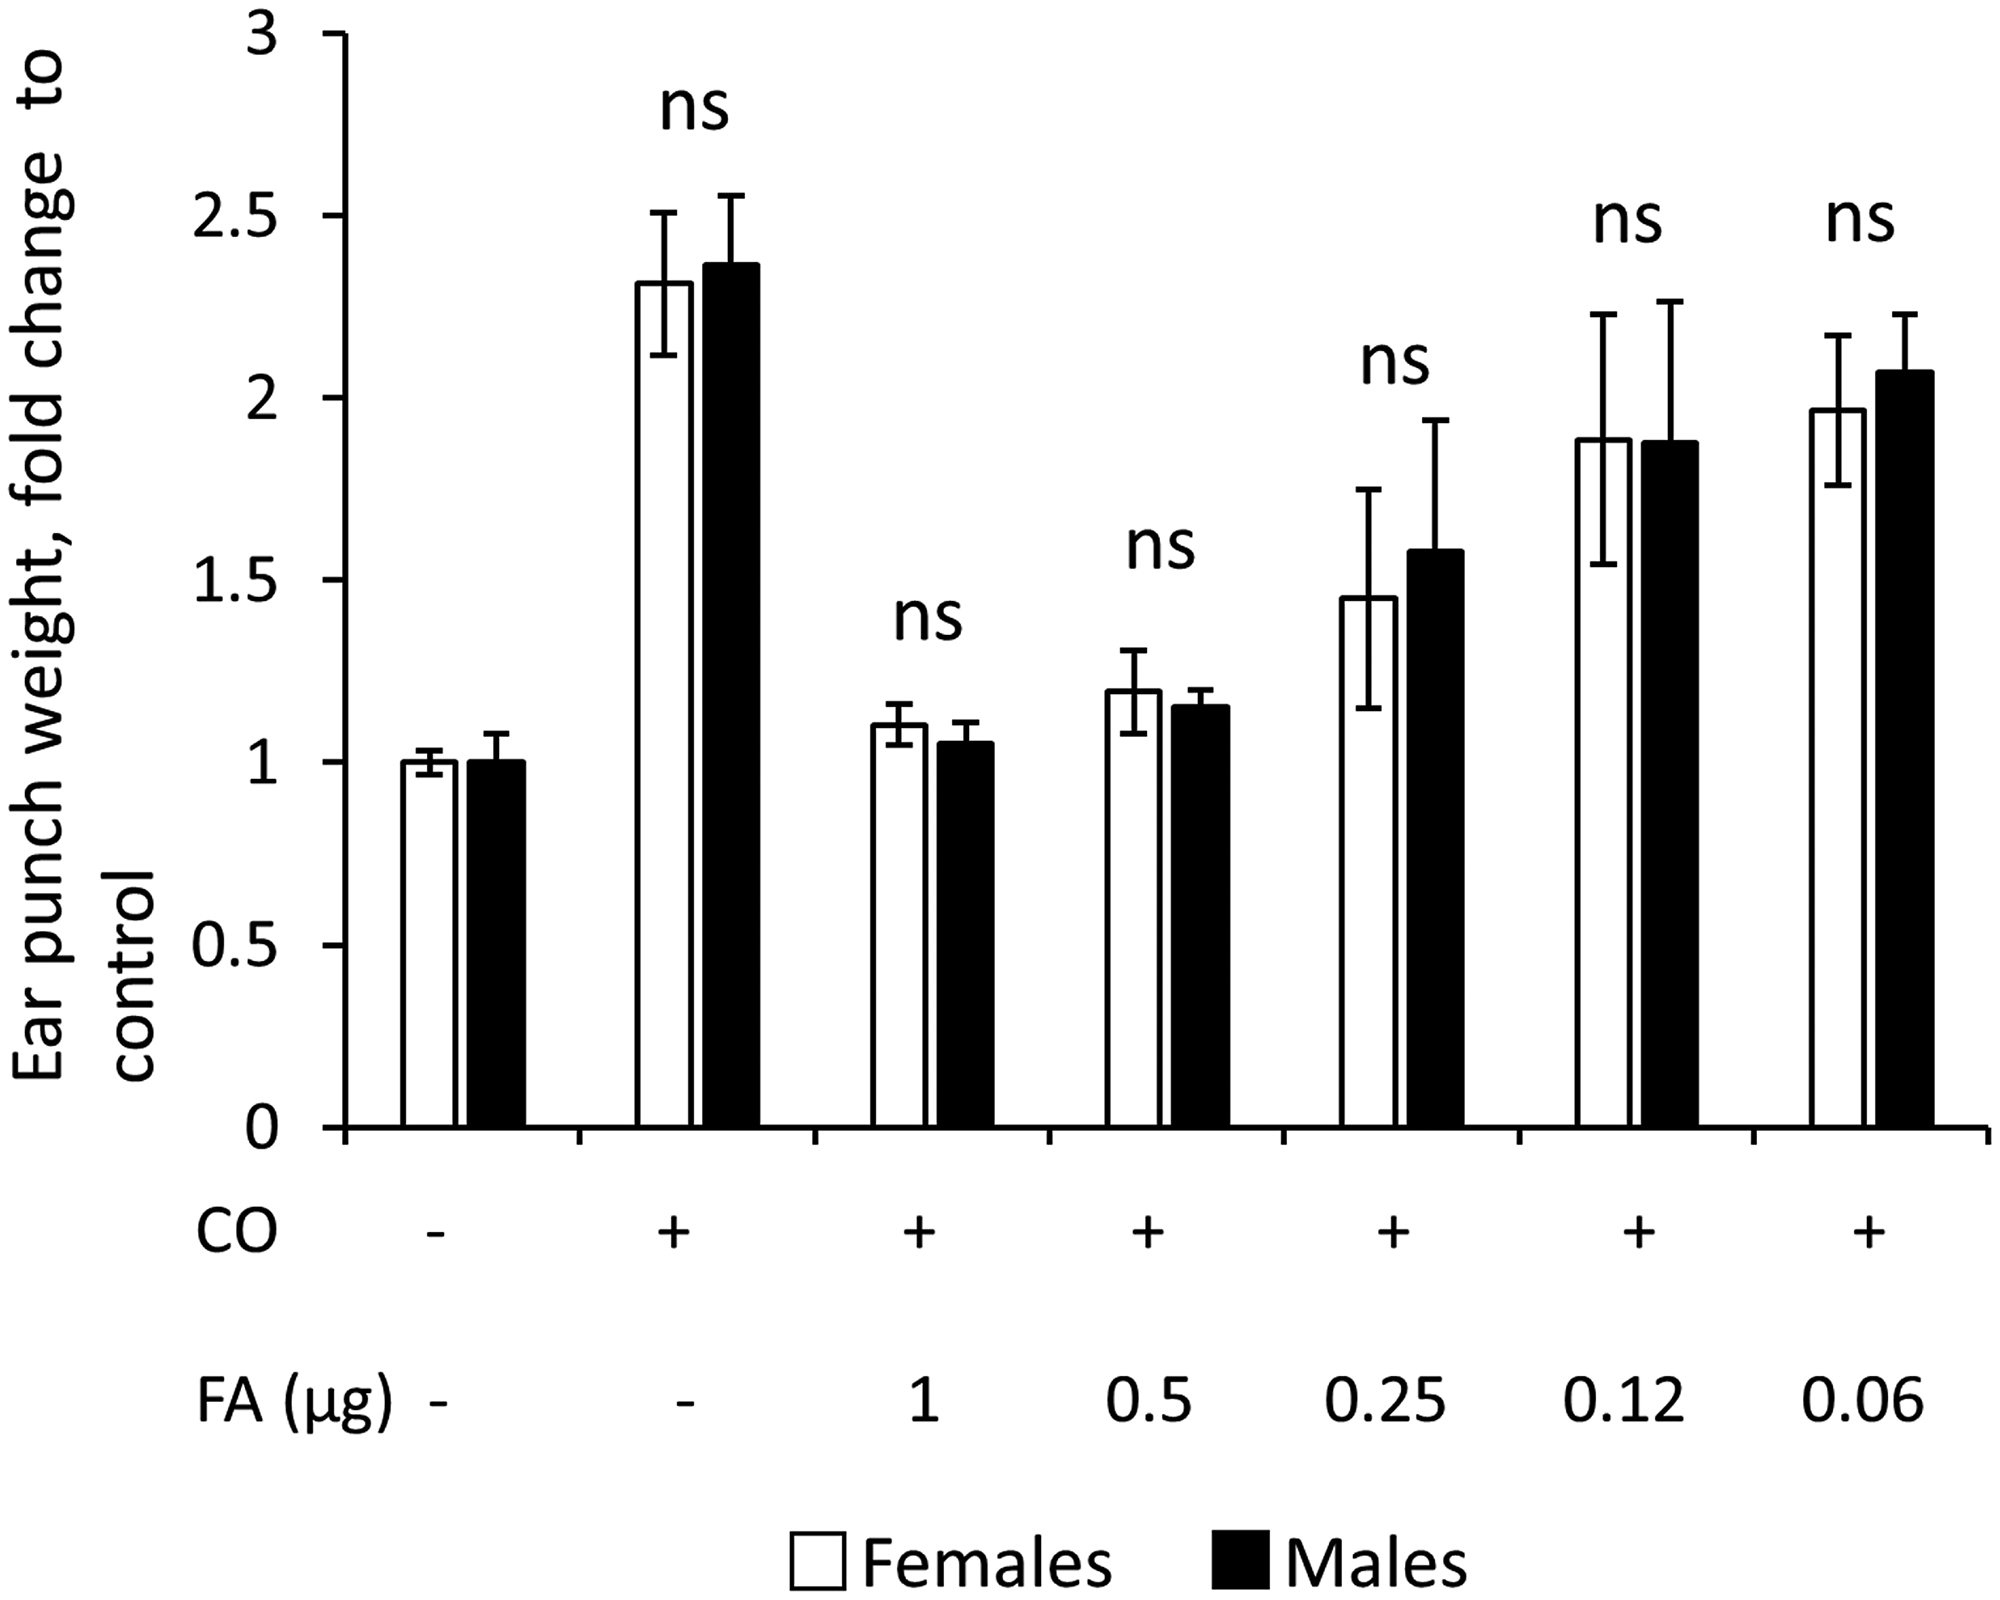 Similar sensitivity of males and females to inflammation and anti-inflammatory effects of glucocorticoid FA in ear edema test.